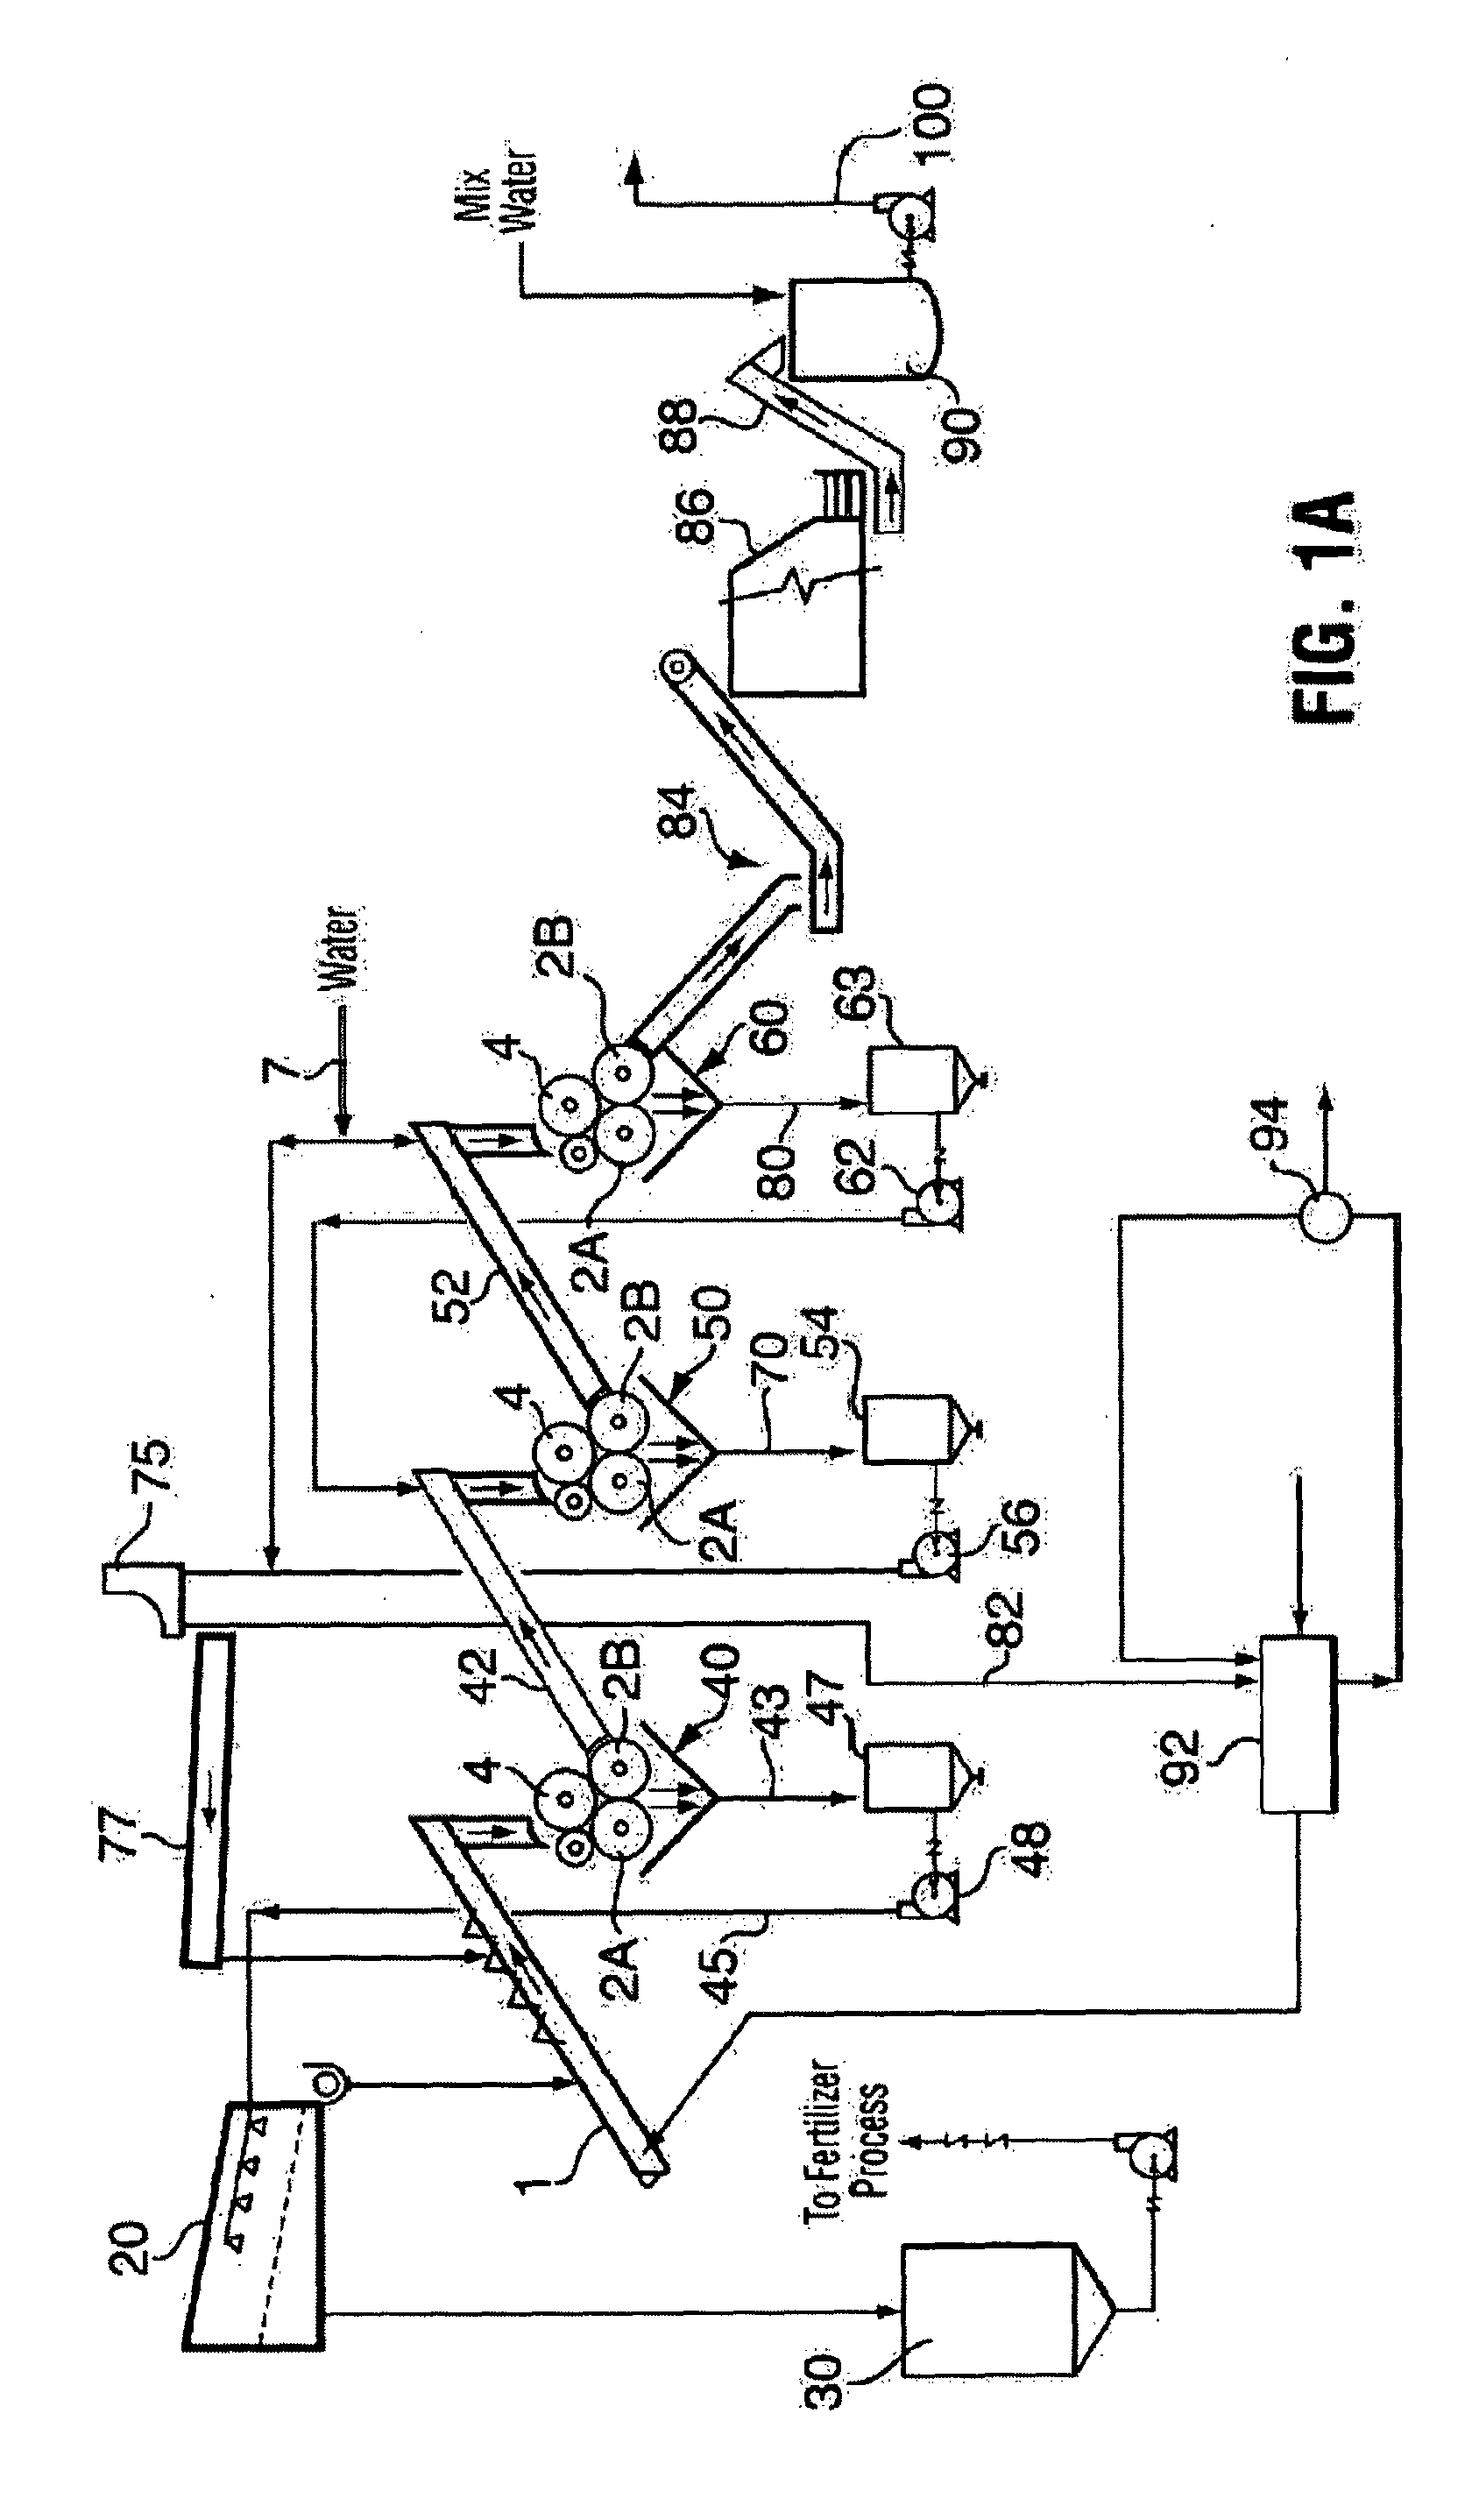 Process for Producing a Pretreated Feedstock